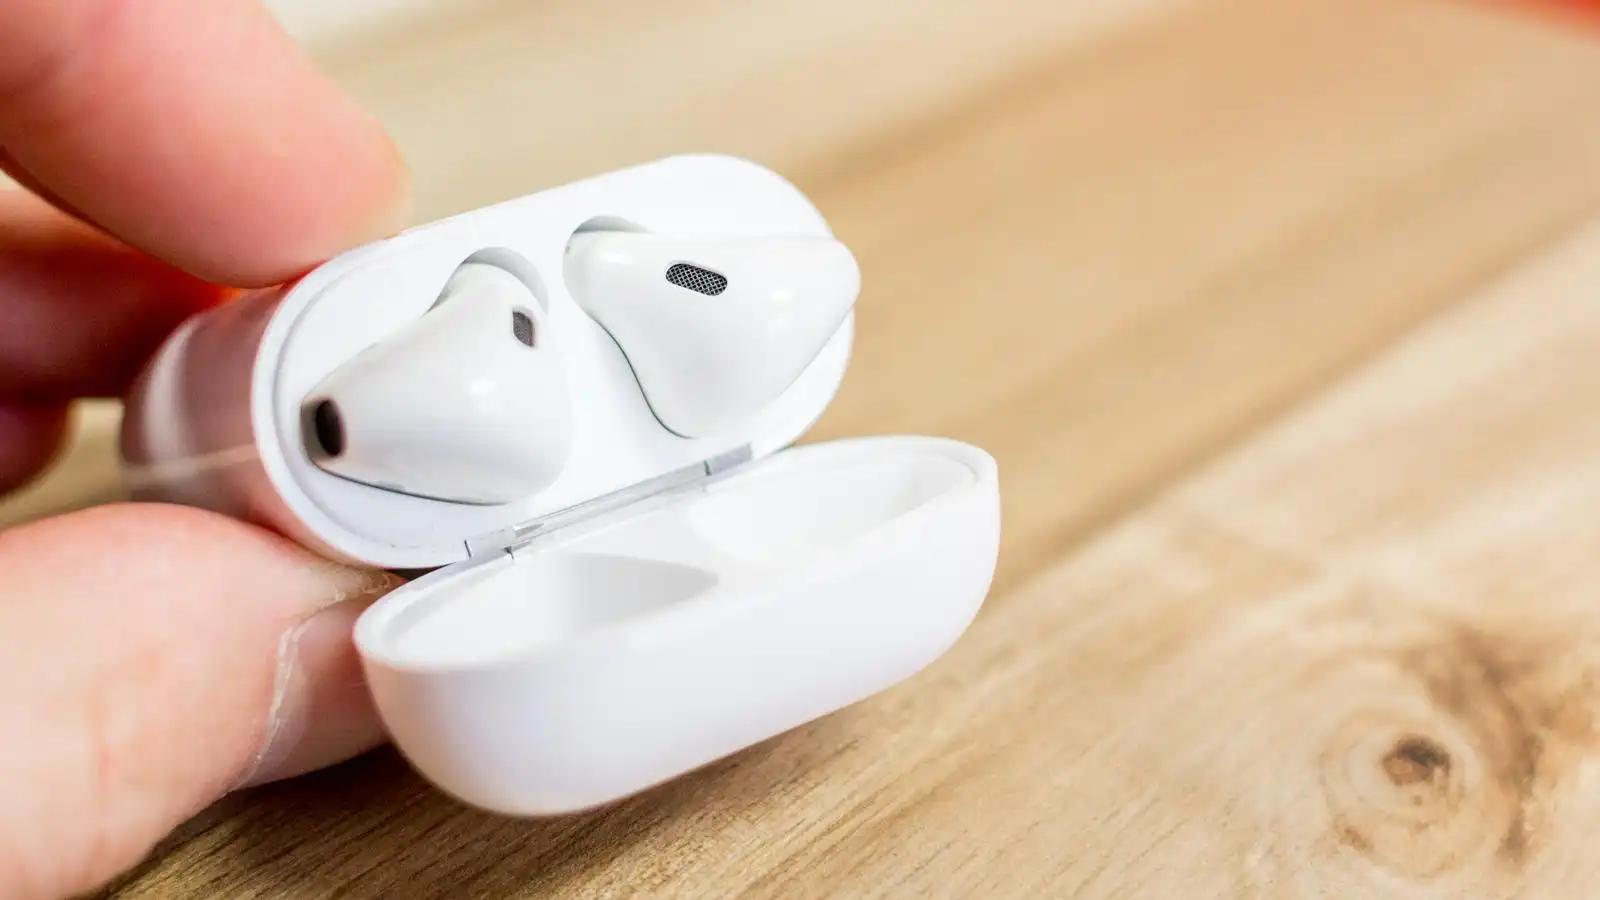 How To Repair Apple AirPods Keep Disconnecting From iPhone?